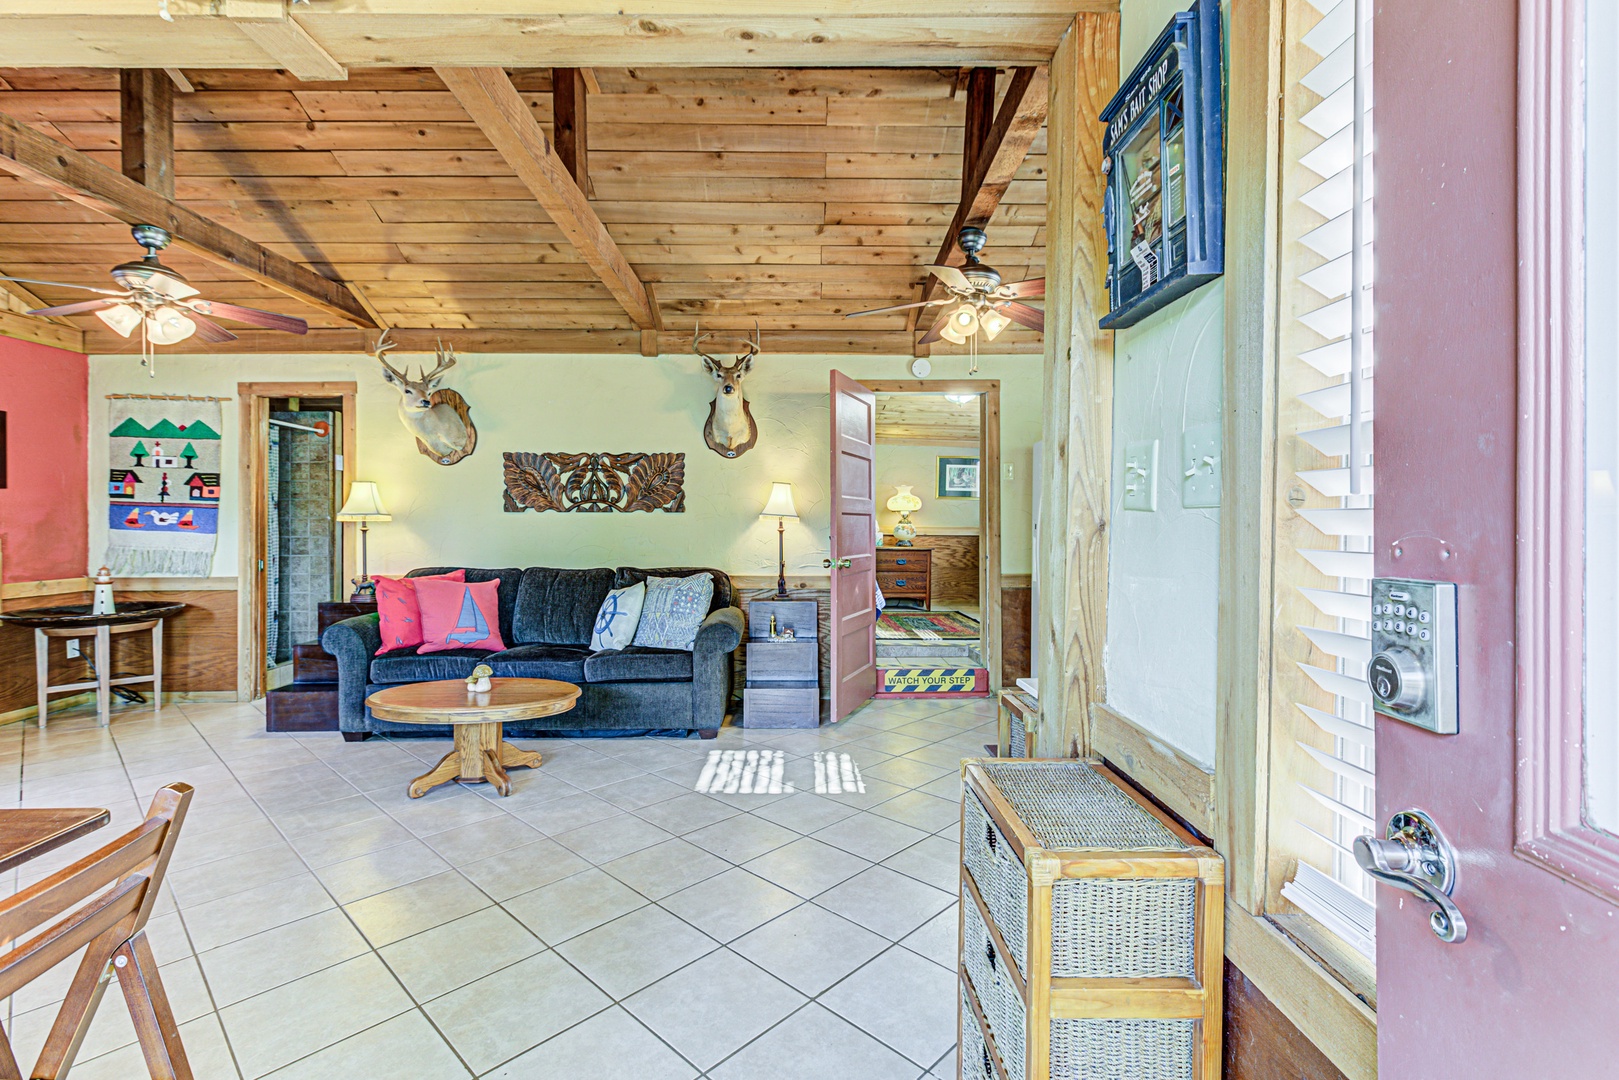 Enjoy the breezy, open layout of the casita’s main living areas